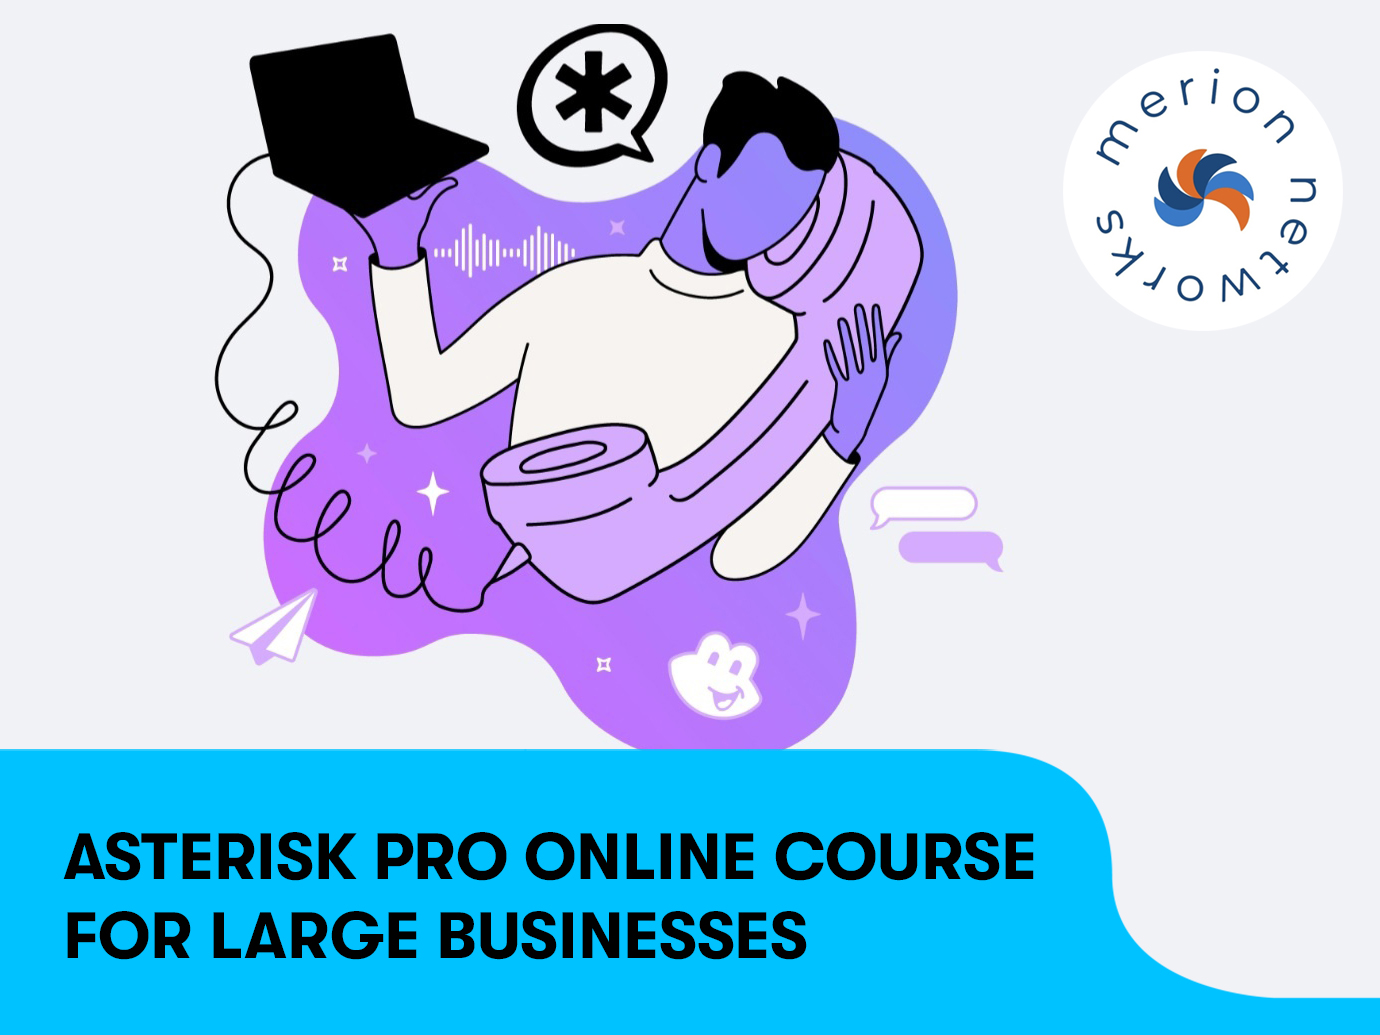 Asterisk PRO online course for Large businesses